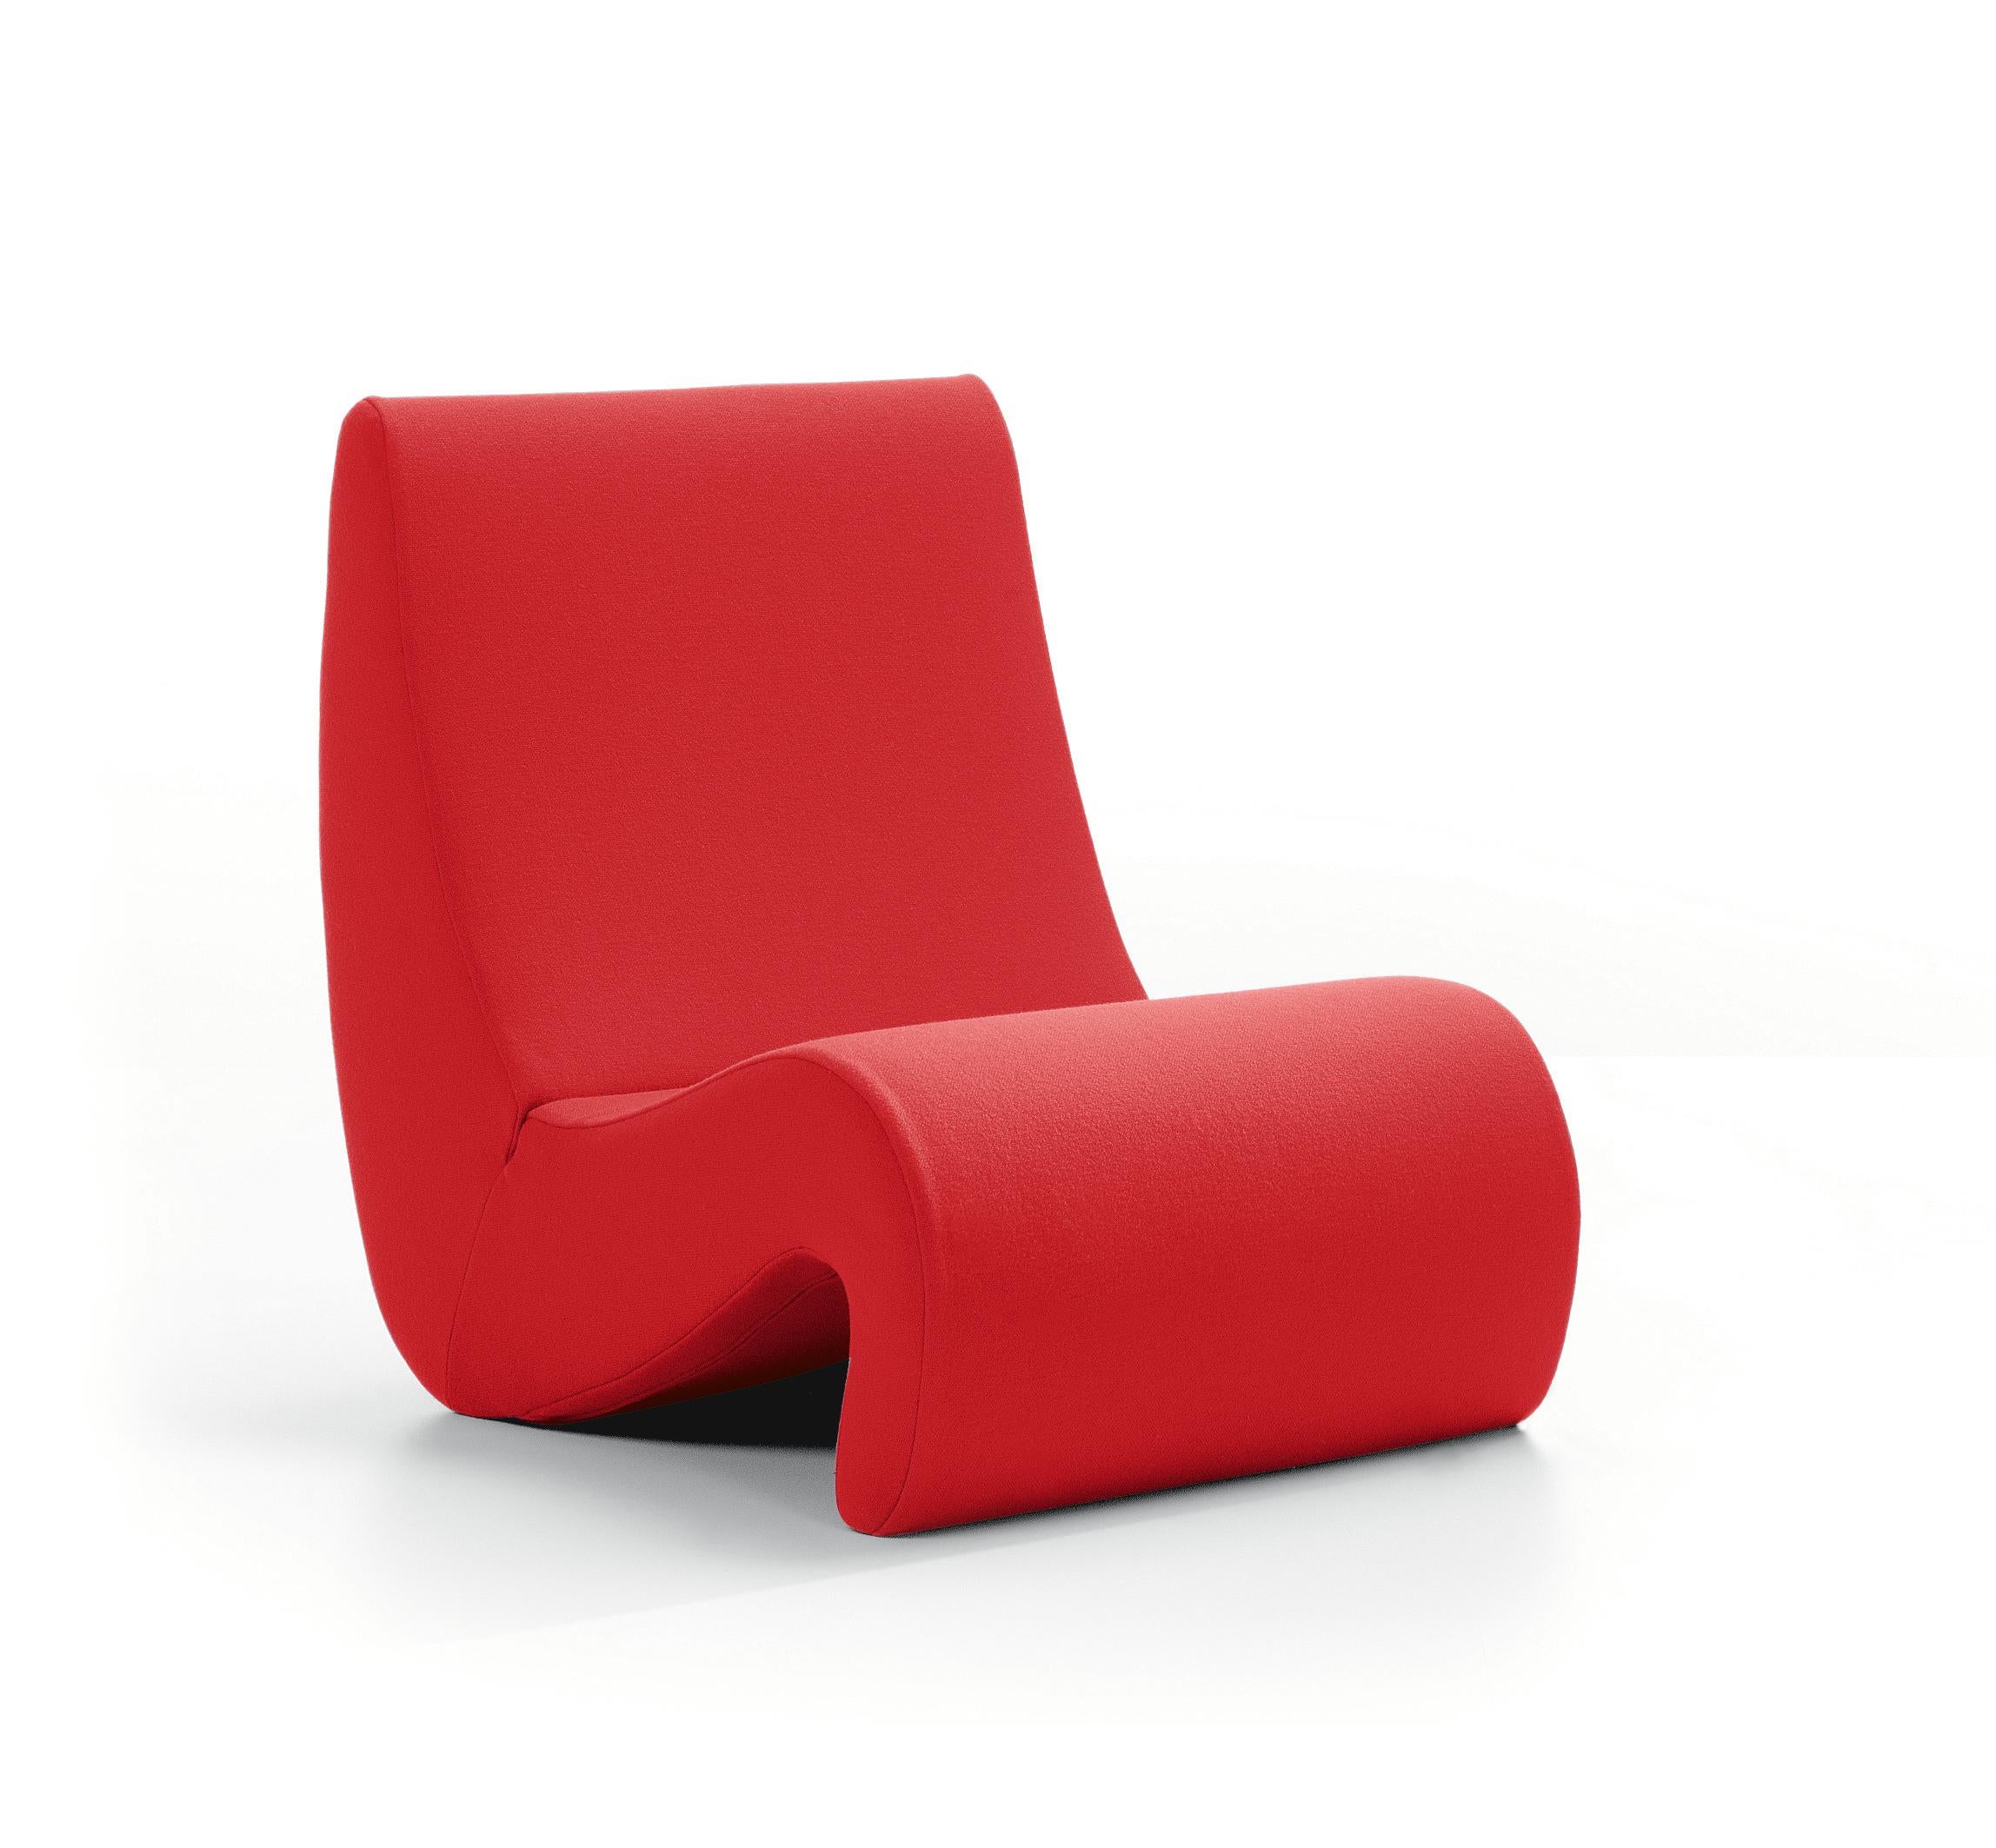 These items are currently only available in the United States.

Amoebe was created by Verner Panton in 1970 for his famous Visiona installation, which included several versions of this lounge piece. It embodies the exuberant spirit of the early